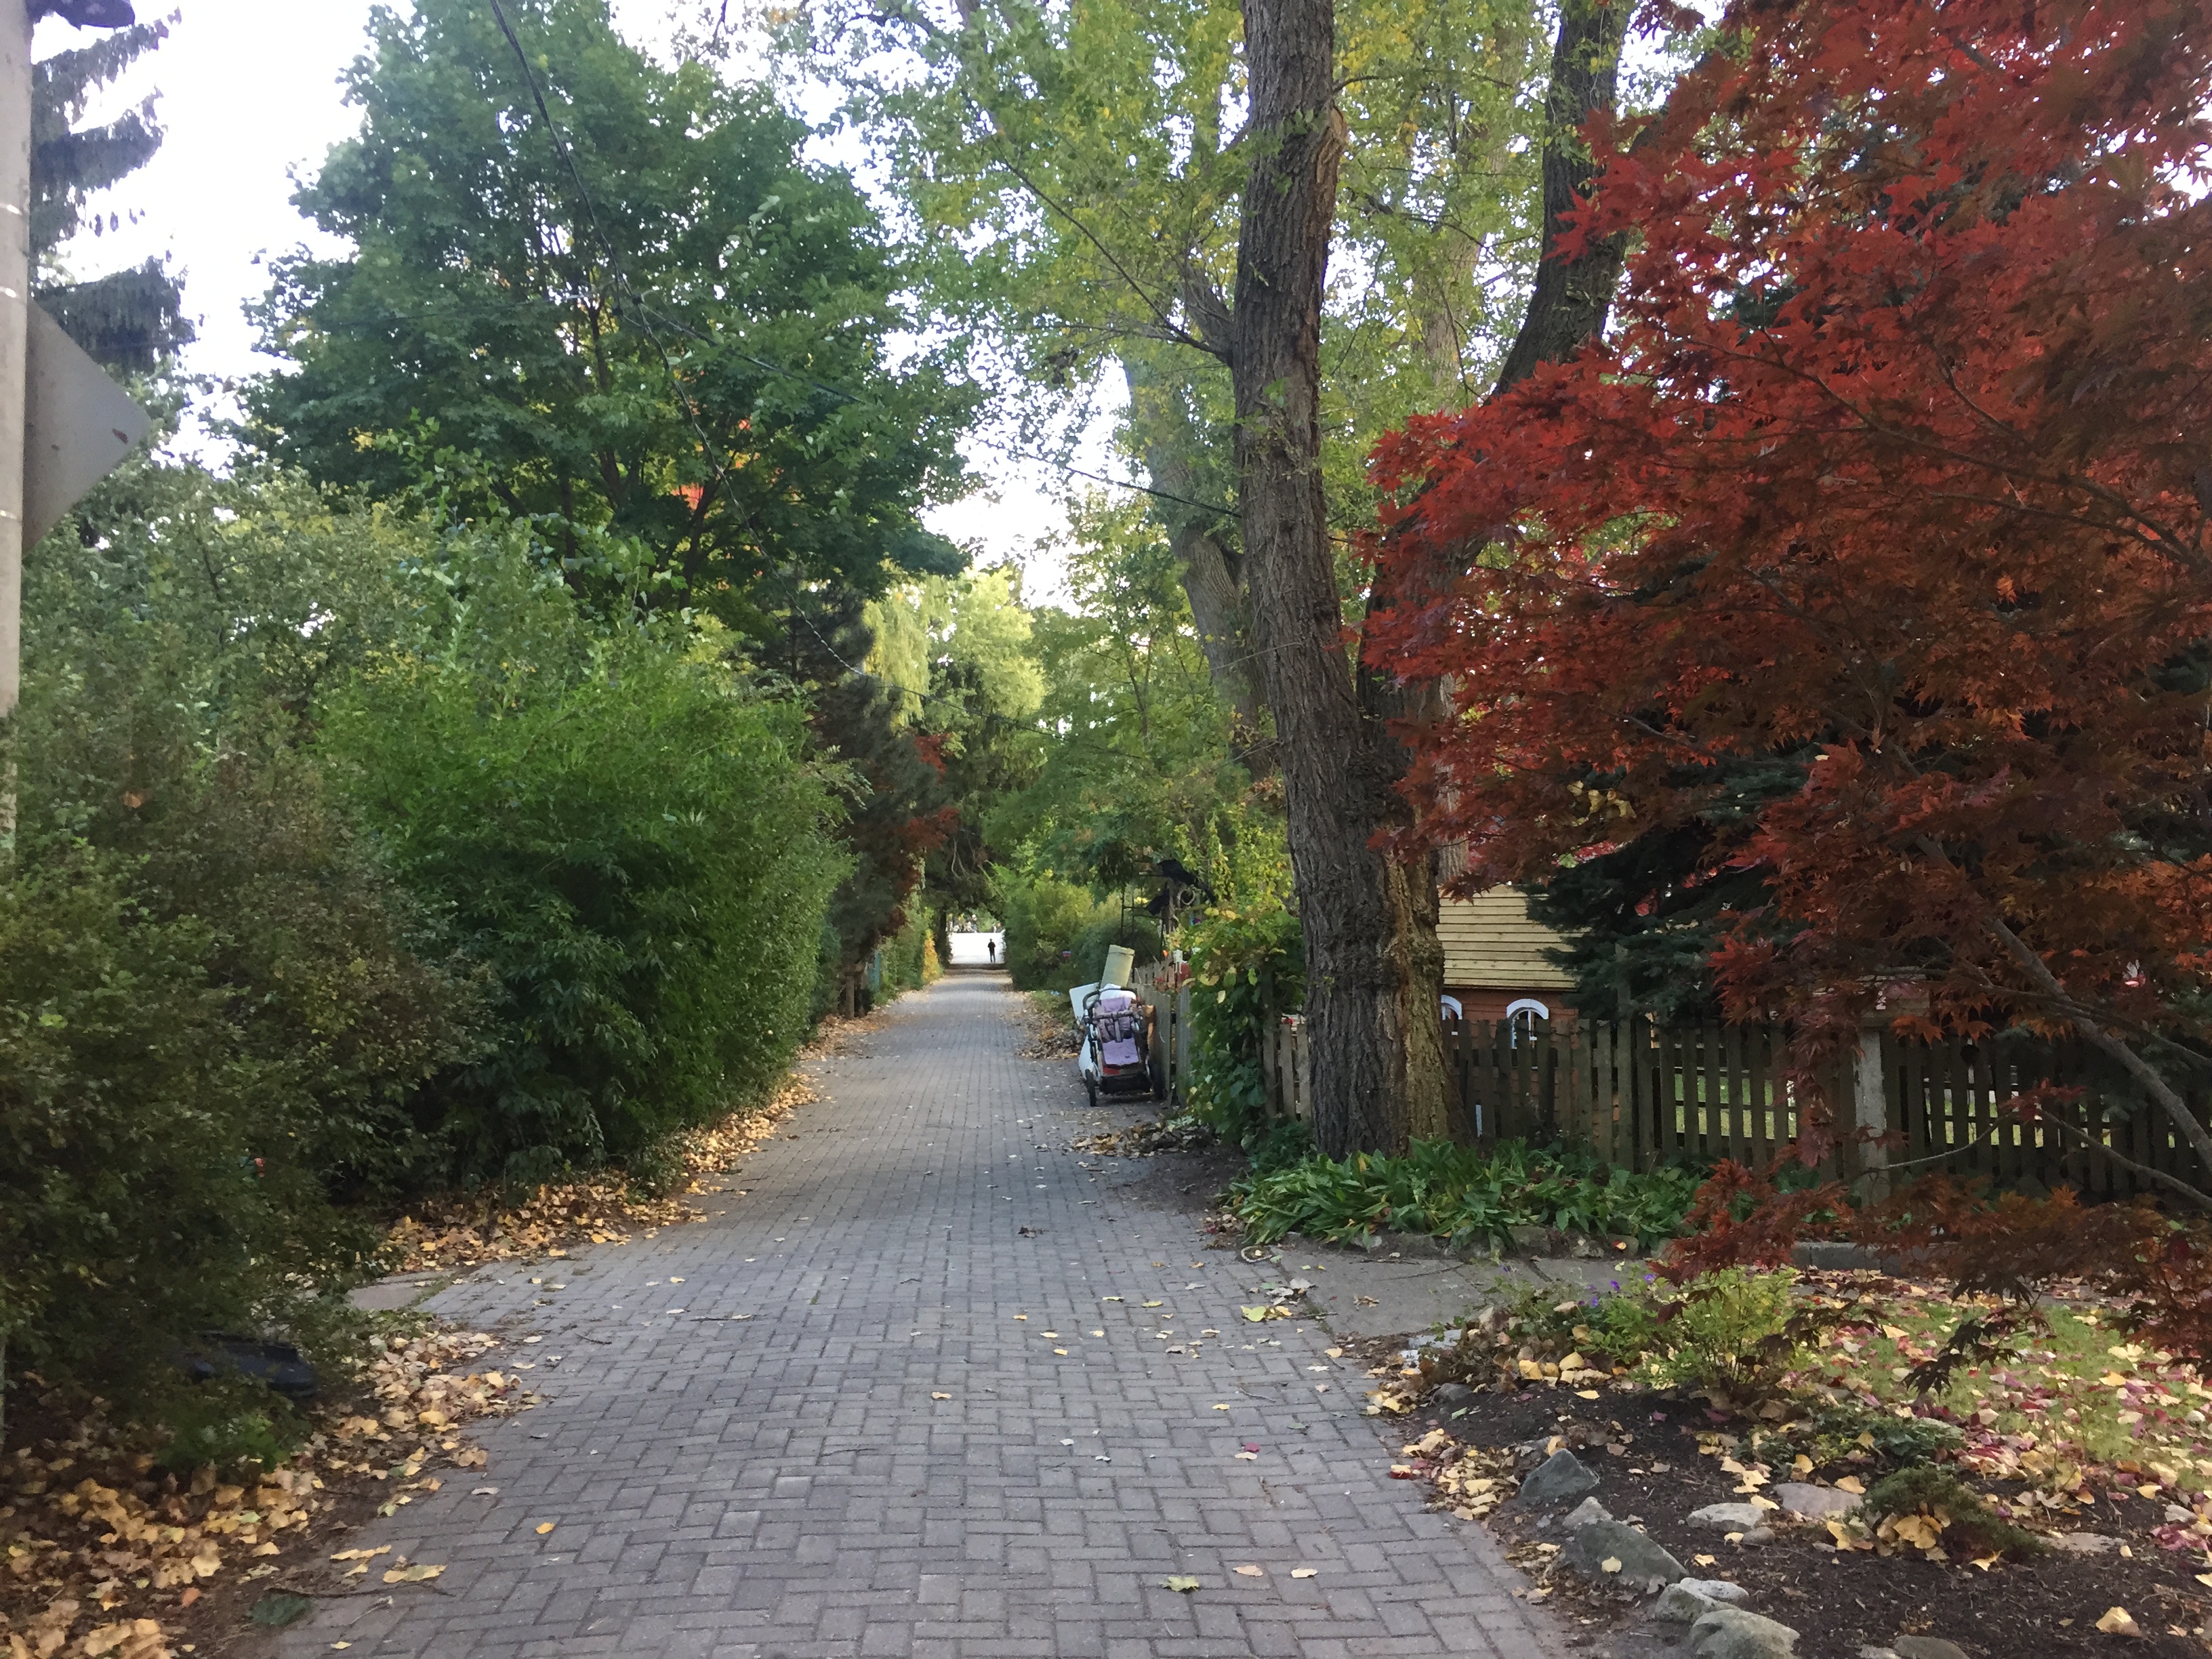 Don't think of Toronto as just another northeast North American city. The absolute best time to visit Toronto is in the fall when the trees are a-changing.